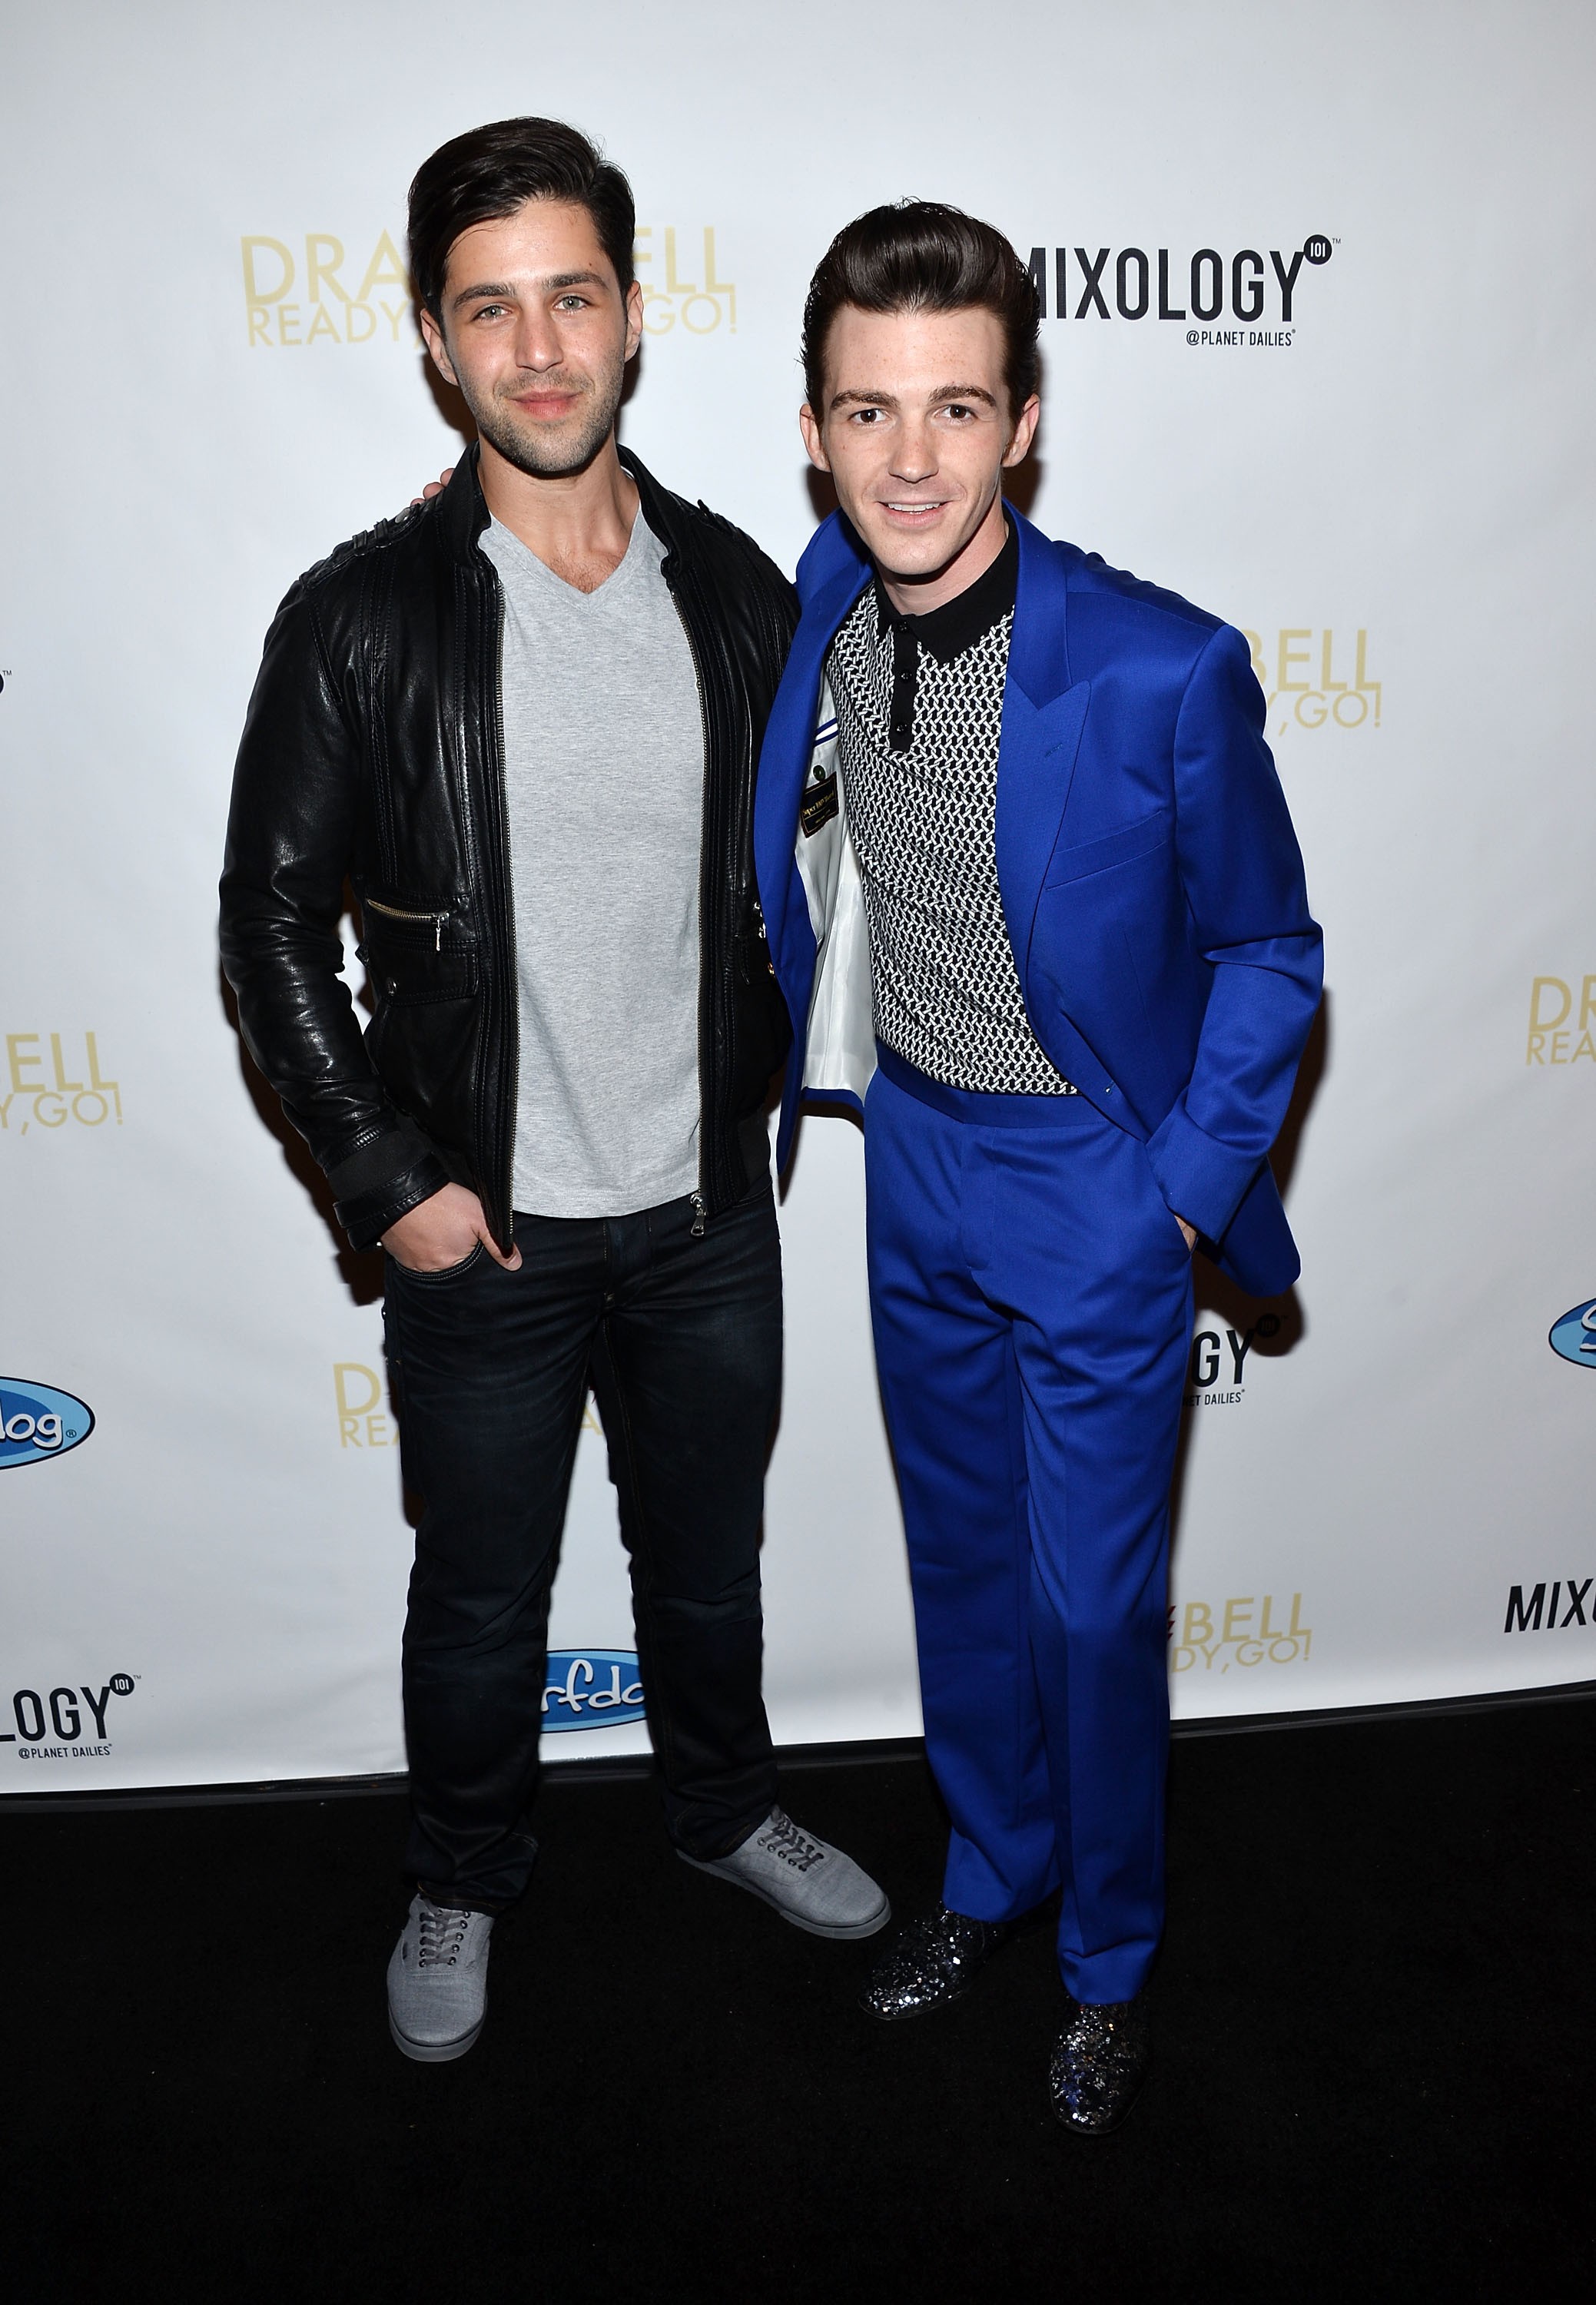 LOS ANGELES, CA - APRIL 17:  Actors Josh Peck (L) and Drake Bell arrive at Drake Bell's "Ready Steady Go!" album release party at Mixology101 & Planet Dailies on April 17, 2014 in Los Angeles, California.  (Photo by Amanda Edwards/WireImage) (Foto: WireImage)